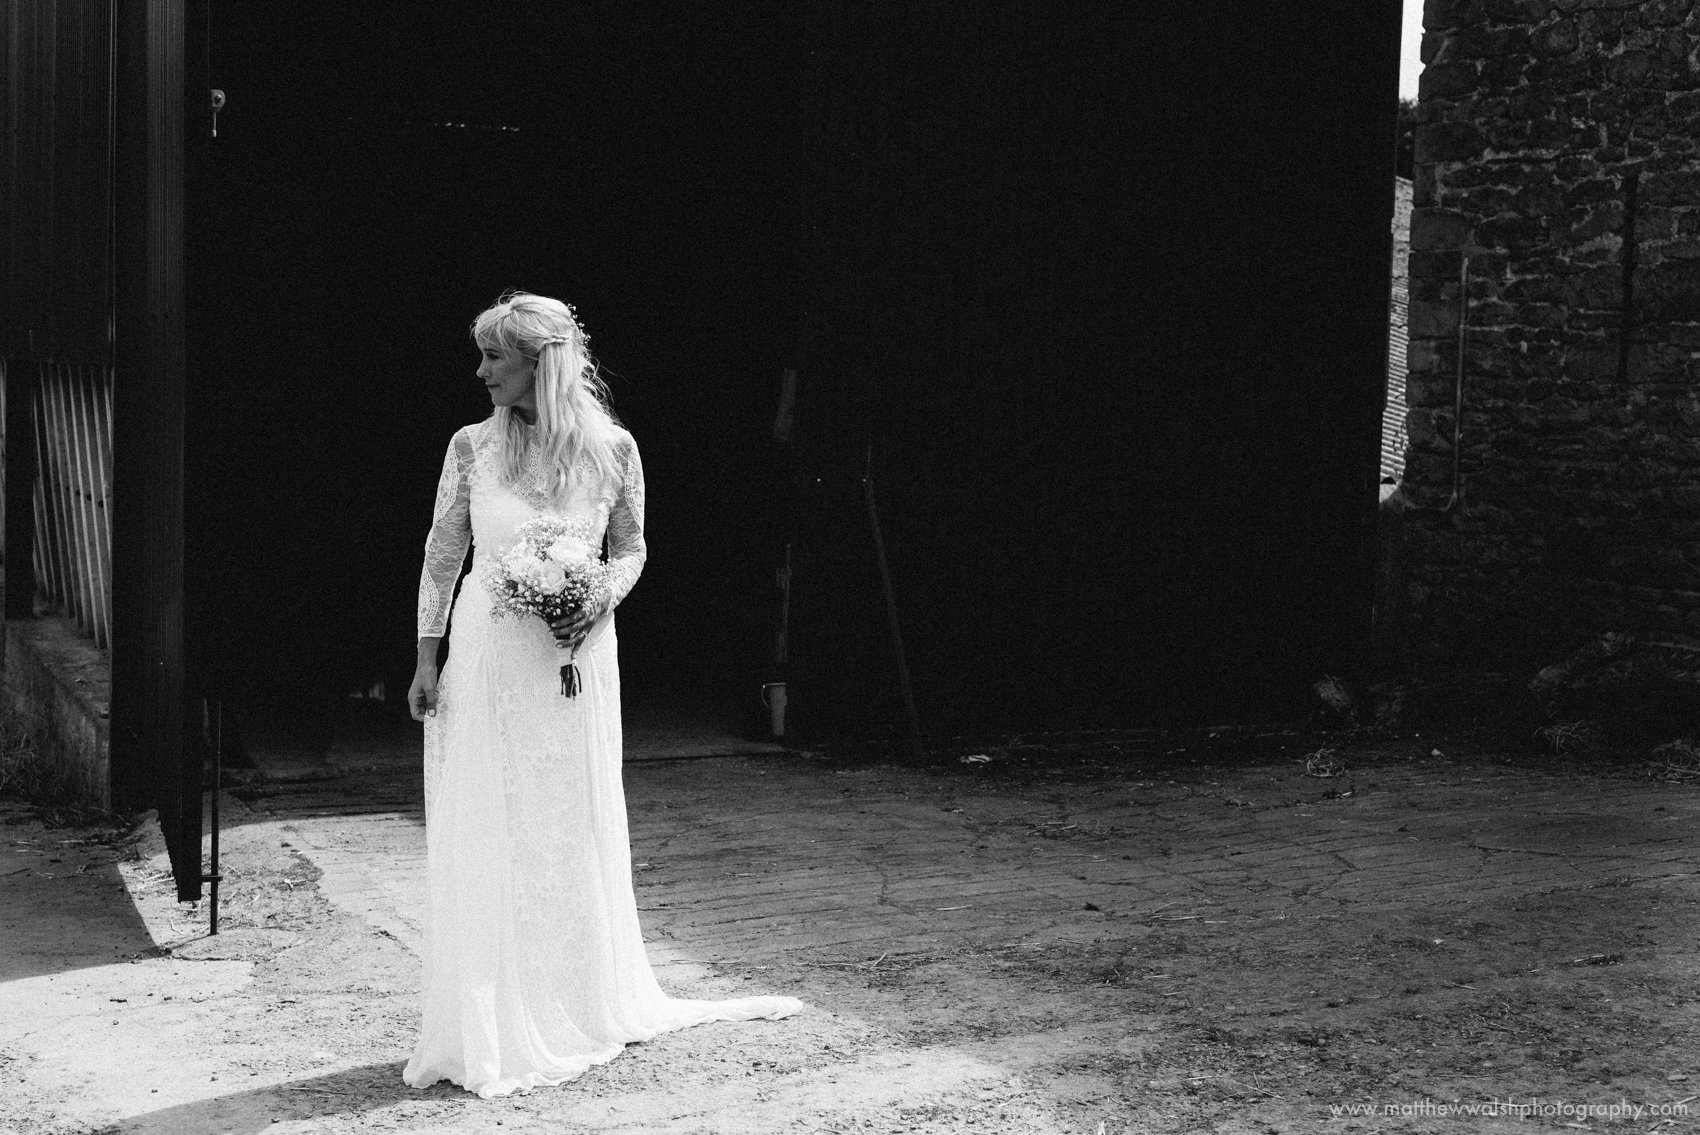 The bride looking elegant and sophisticated in her lace wedding dress, captured in black and white to make the dress really stand out